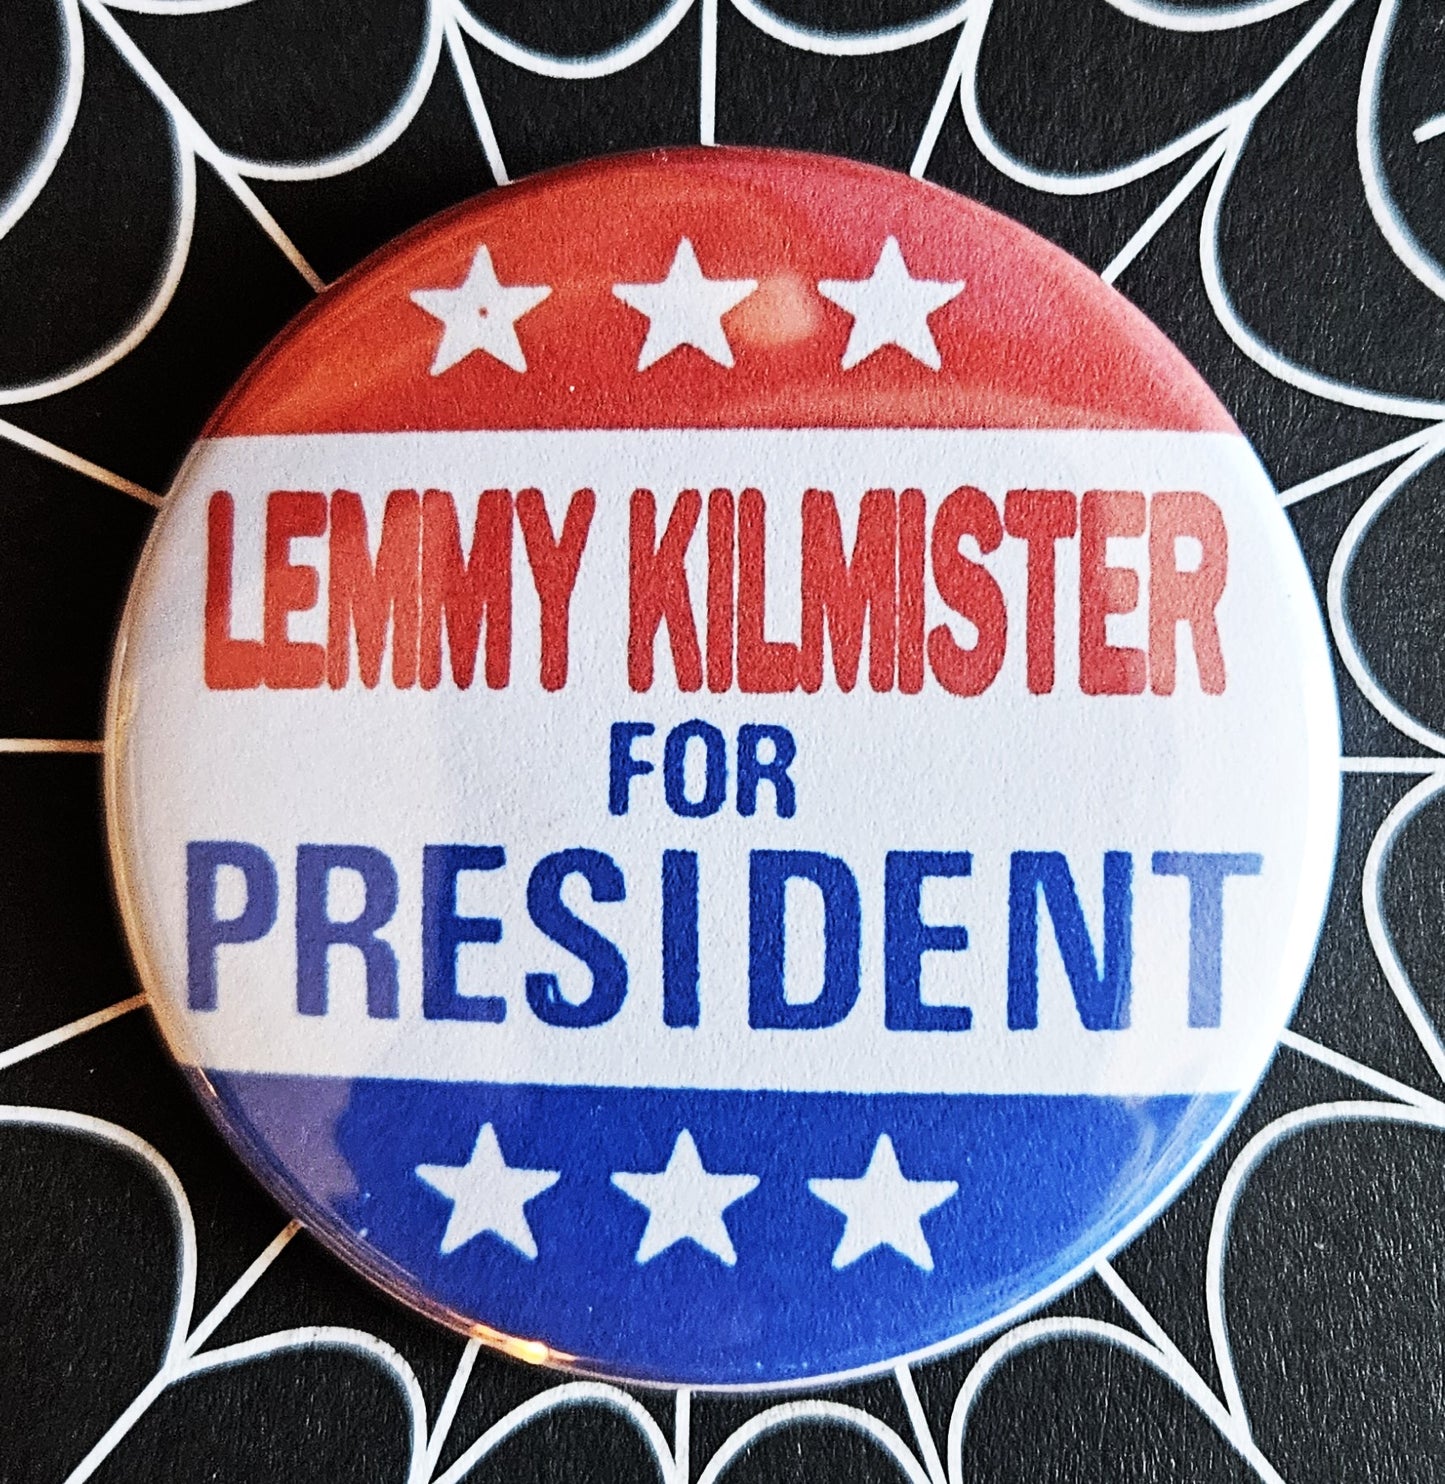 Rockers for President pinback Buttons & Bottle Openers. Set 6